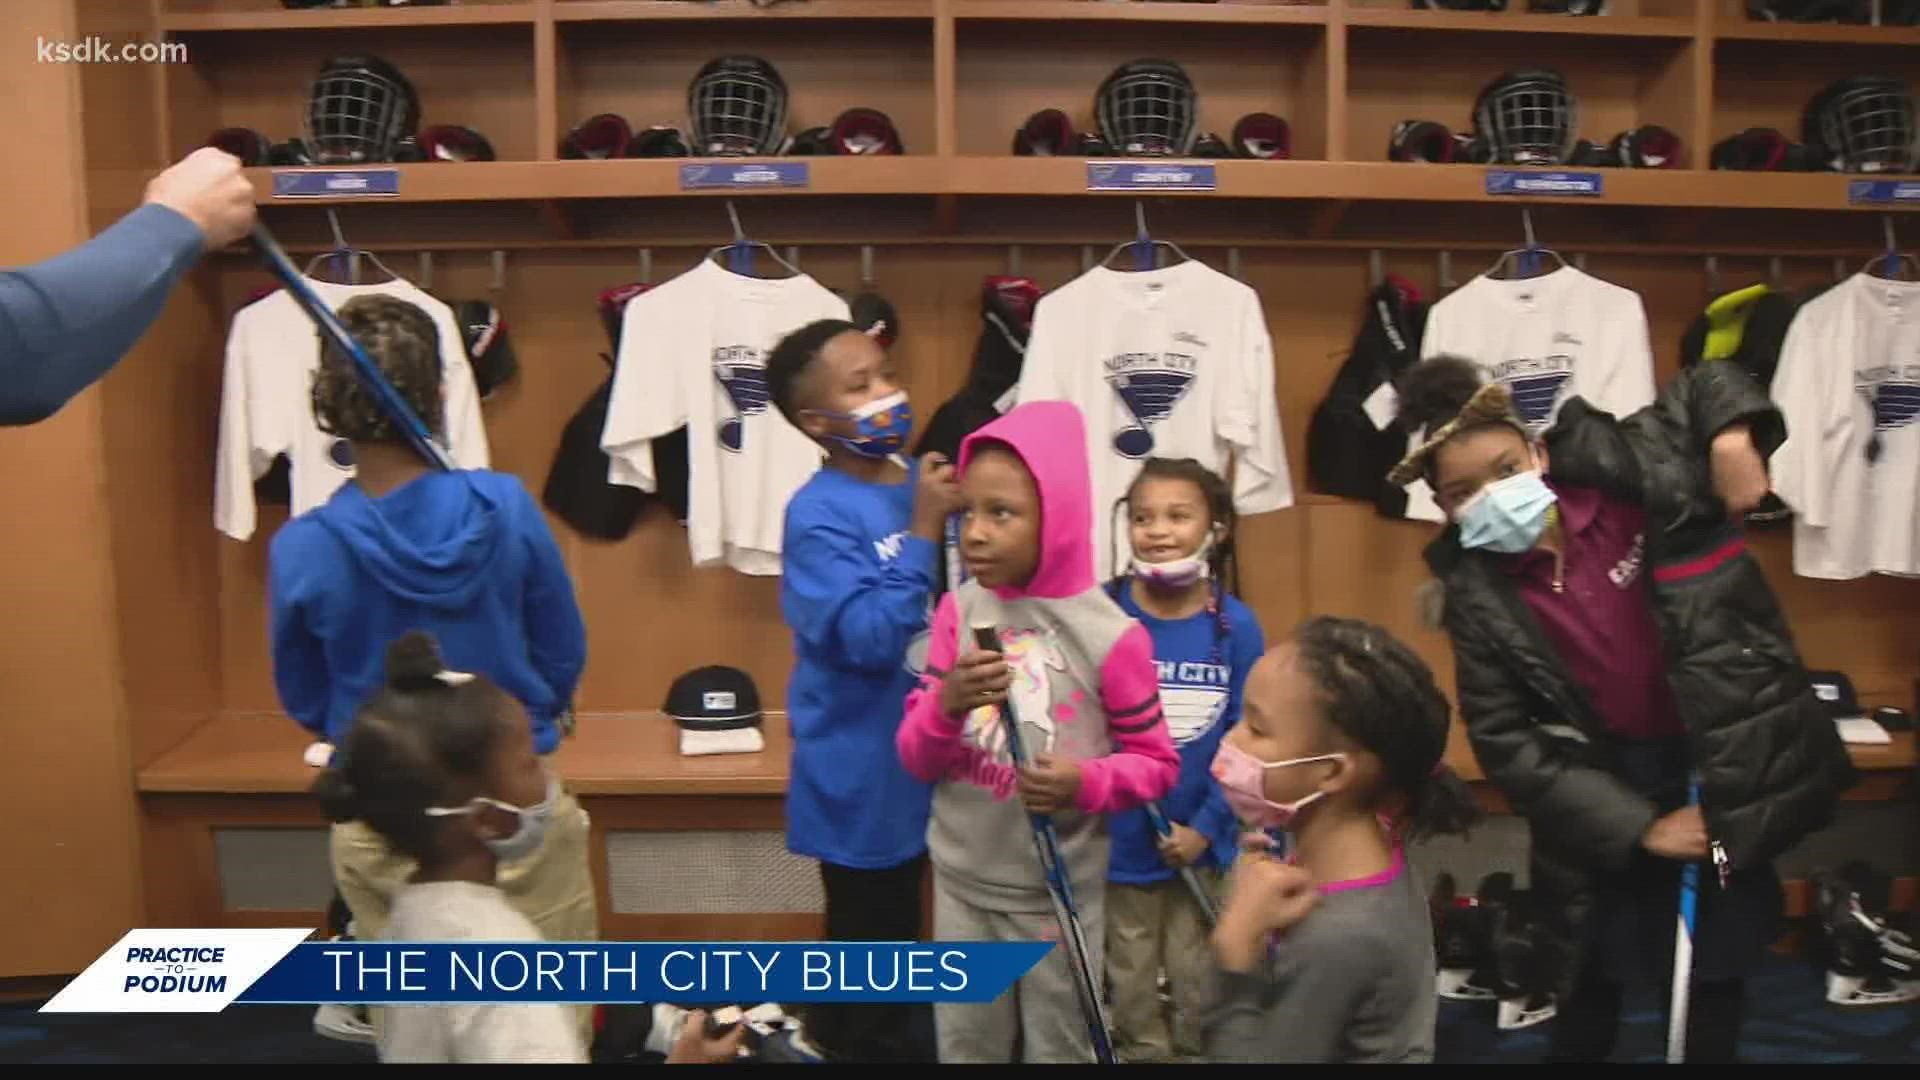 North City Blues give children game-like experience, lessons